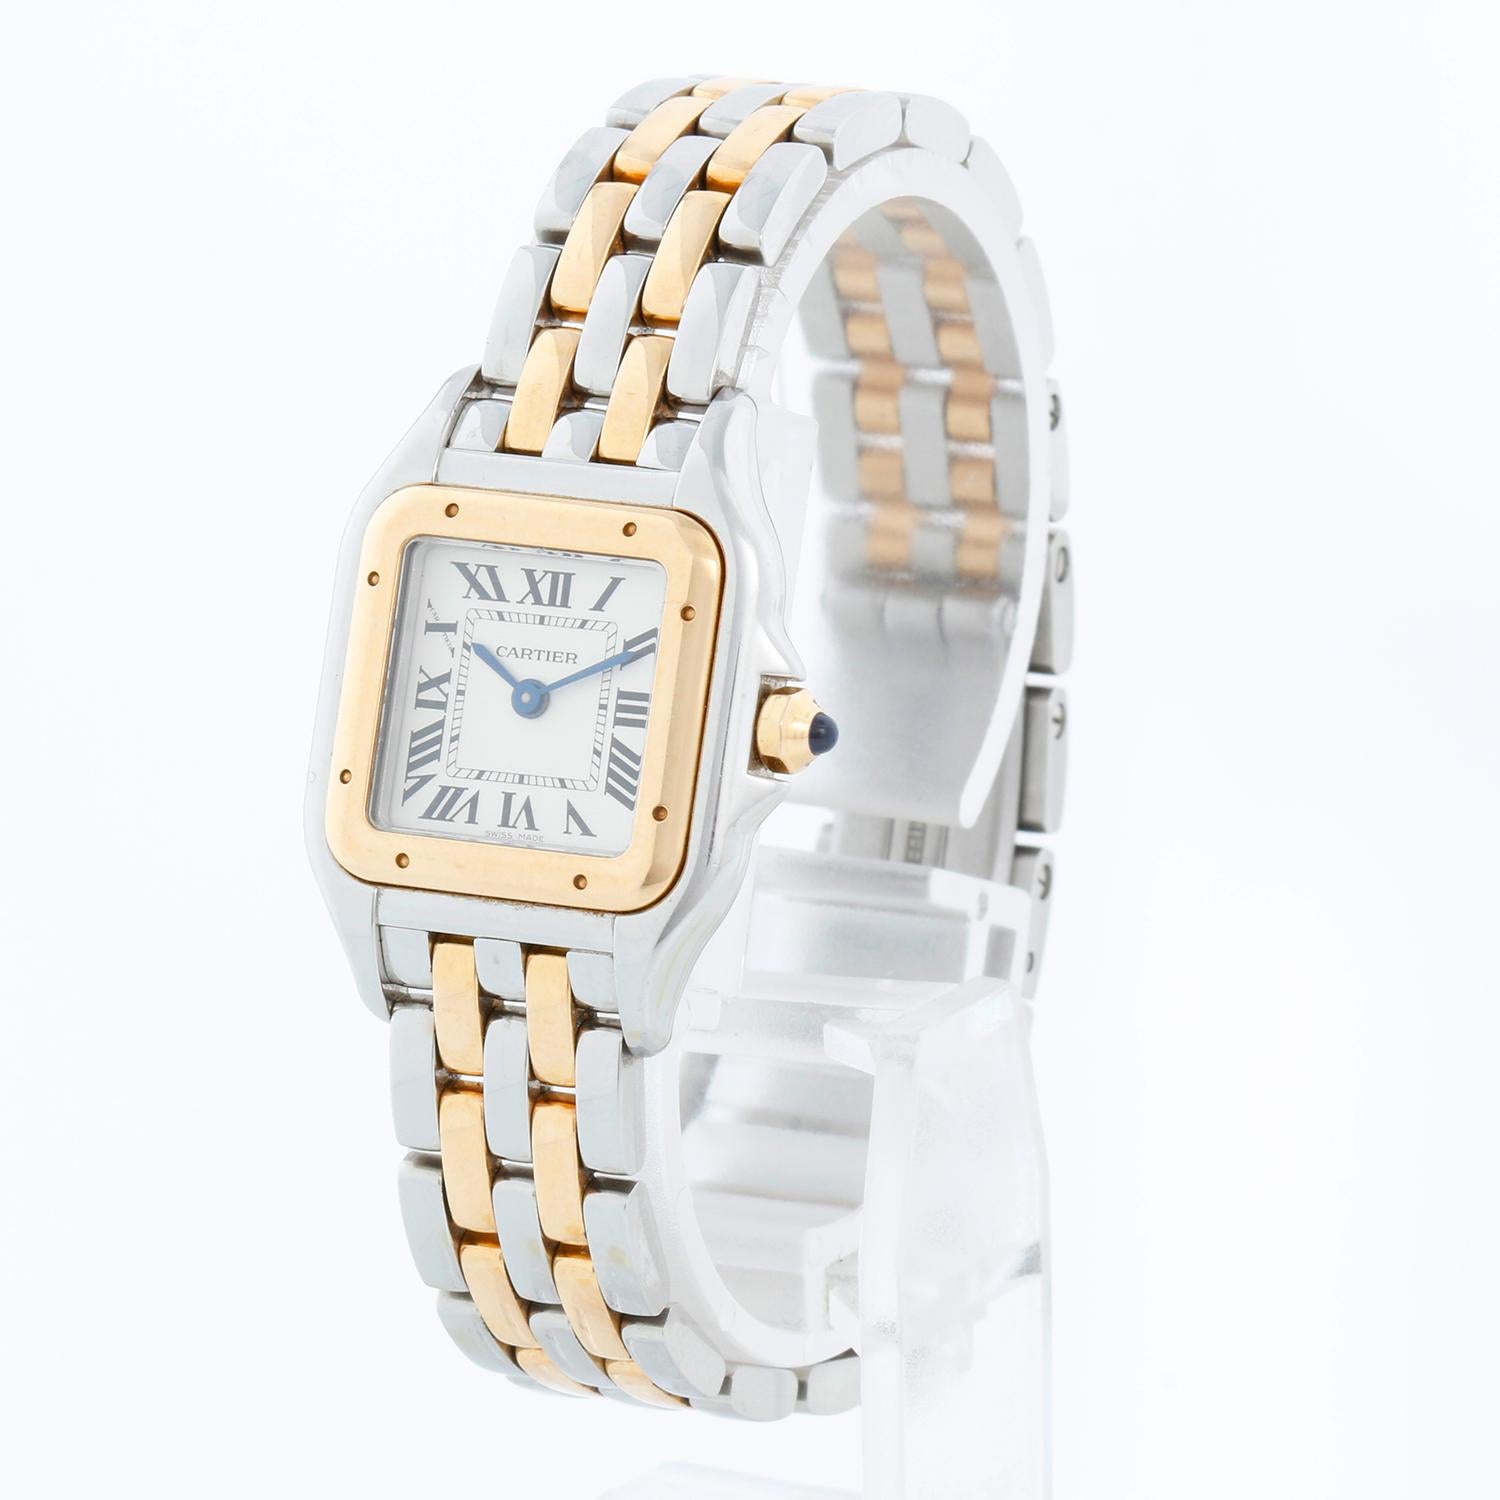 Cartier Panther Small 2-Tone Steel & Gold Panthere Watch 4023 W2PN0006 - Quartz. Stainless steel case with 18k yellow gold bezel (22mm x 30mm). Silver colored dial with black Roman numerals. Stainless steel Panthere bracelet with 2-row of 18k yellow